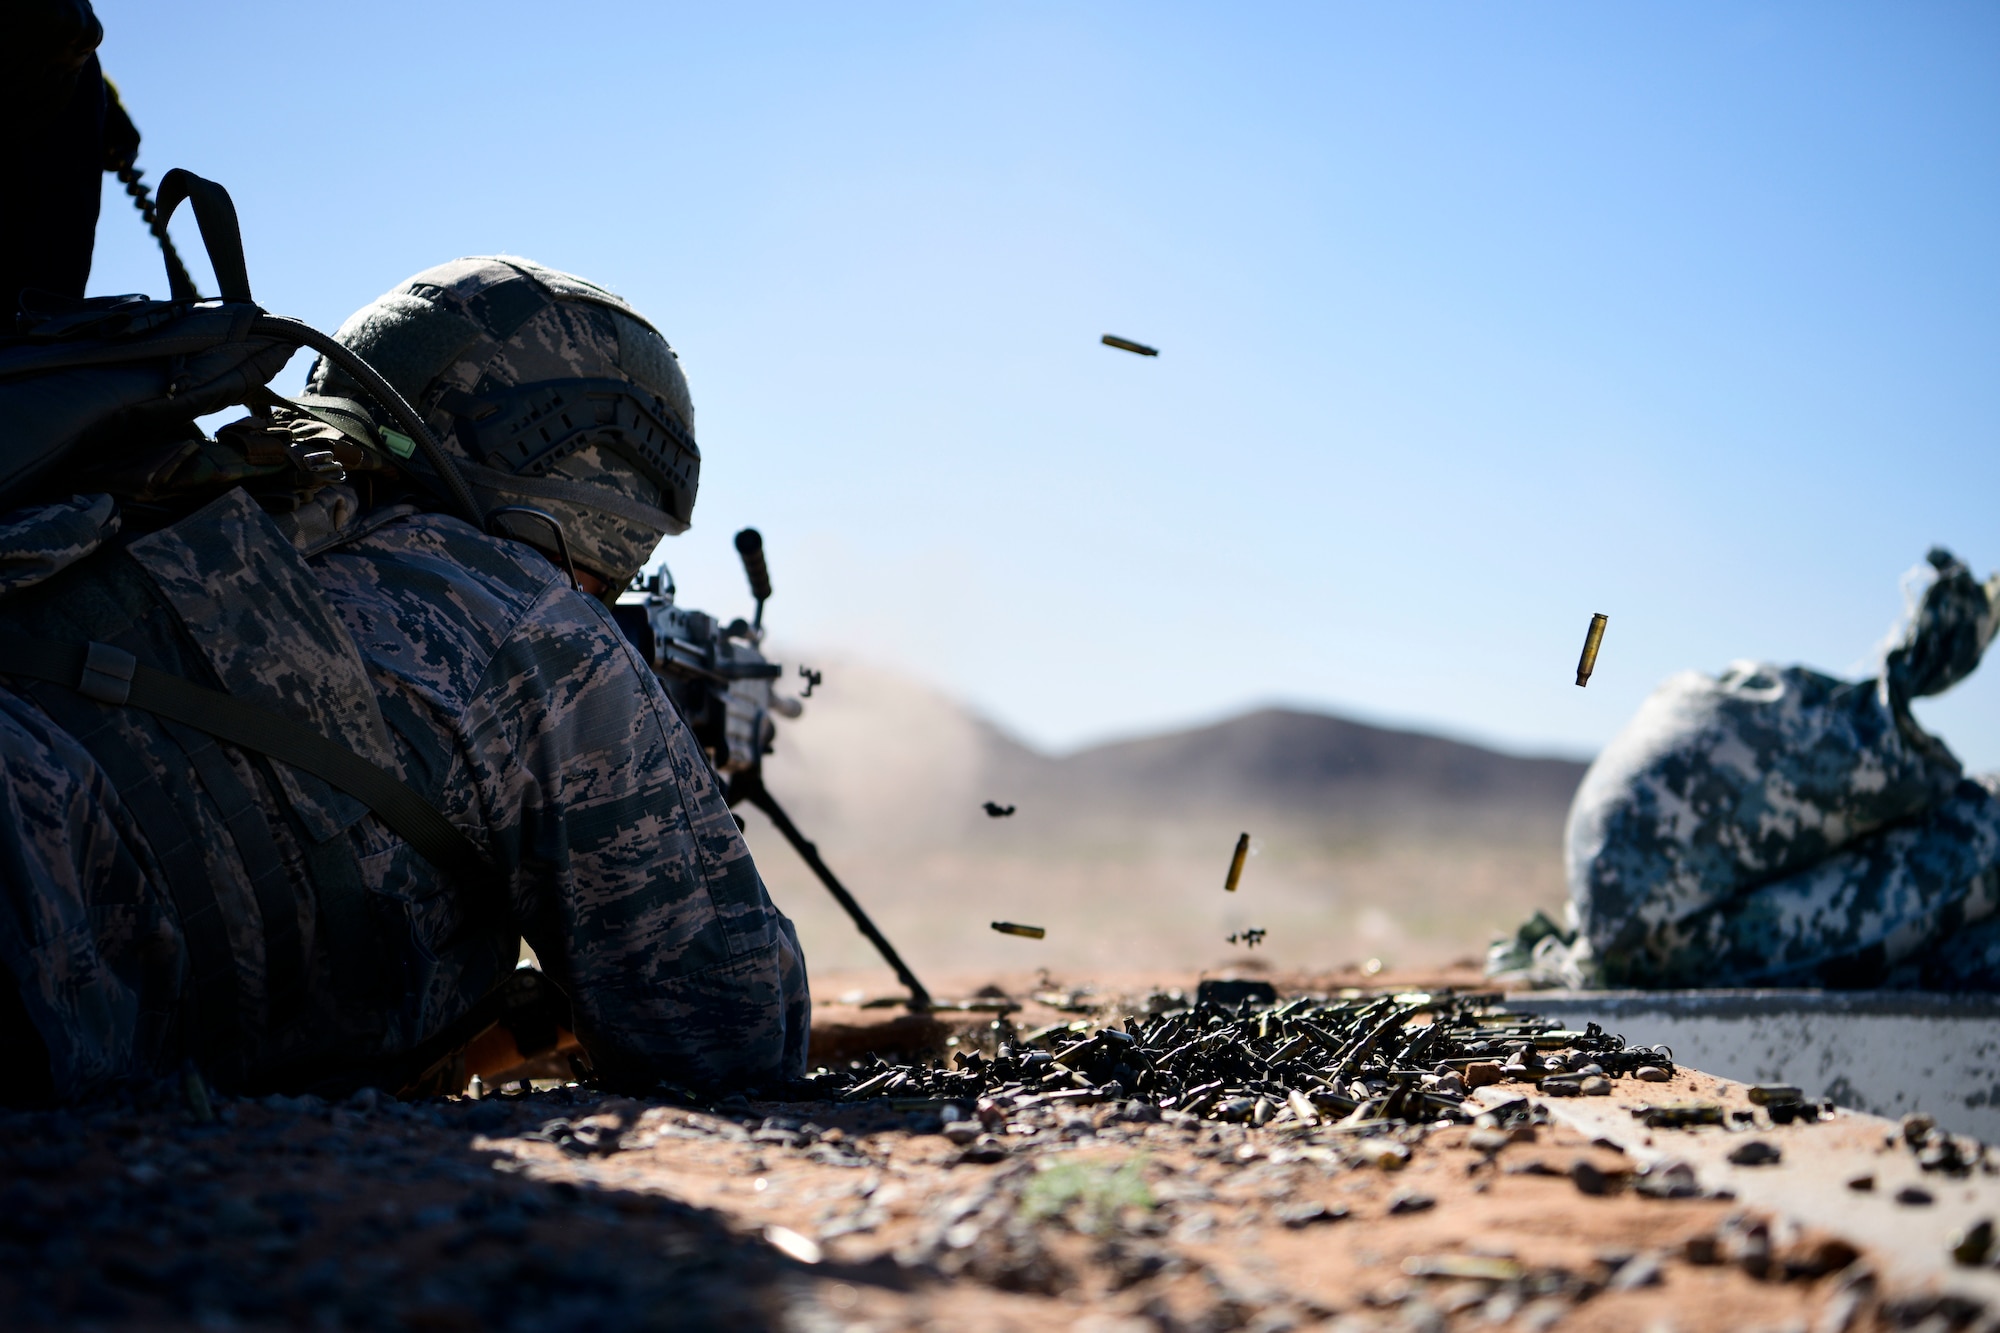 An Airman participating in the Combat Support Wing exercise shoots an M249 machine gun, May 1, 2019, at Fort Bliss, Texas. Airmen trained for the CSW concept by participating in various exercises such as flightline maintenance and operations, security, and other combat support functions. (U.S. Air Force photo by Senior Airman Kenneth Boyton)